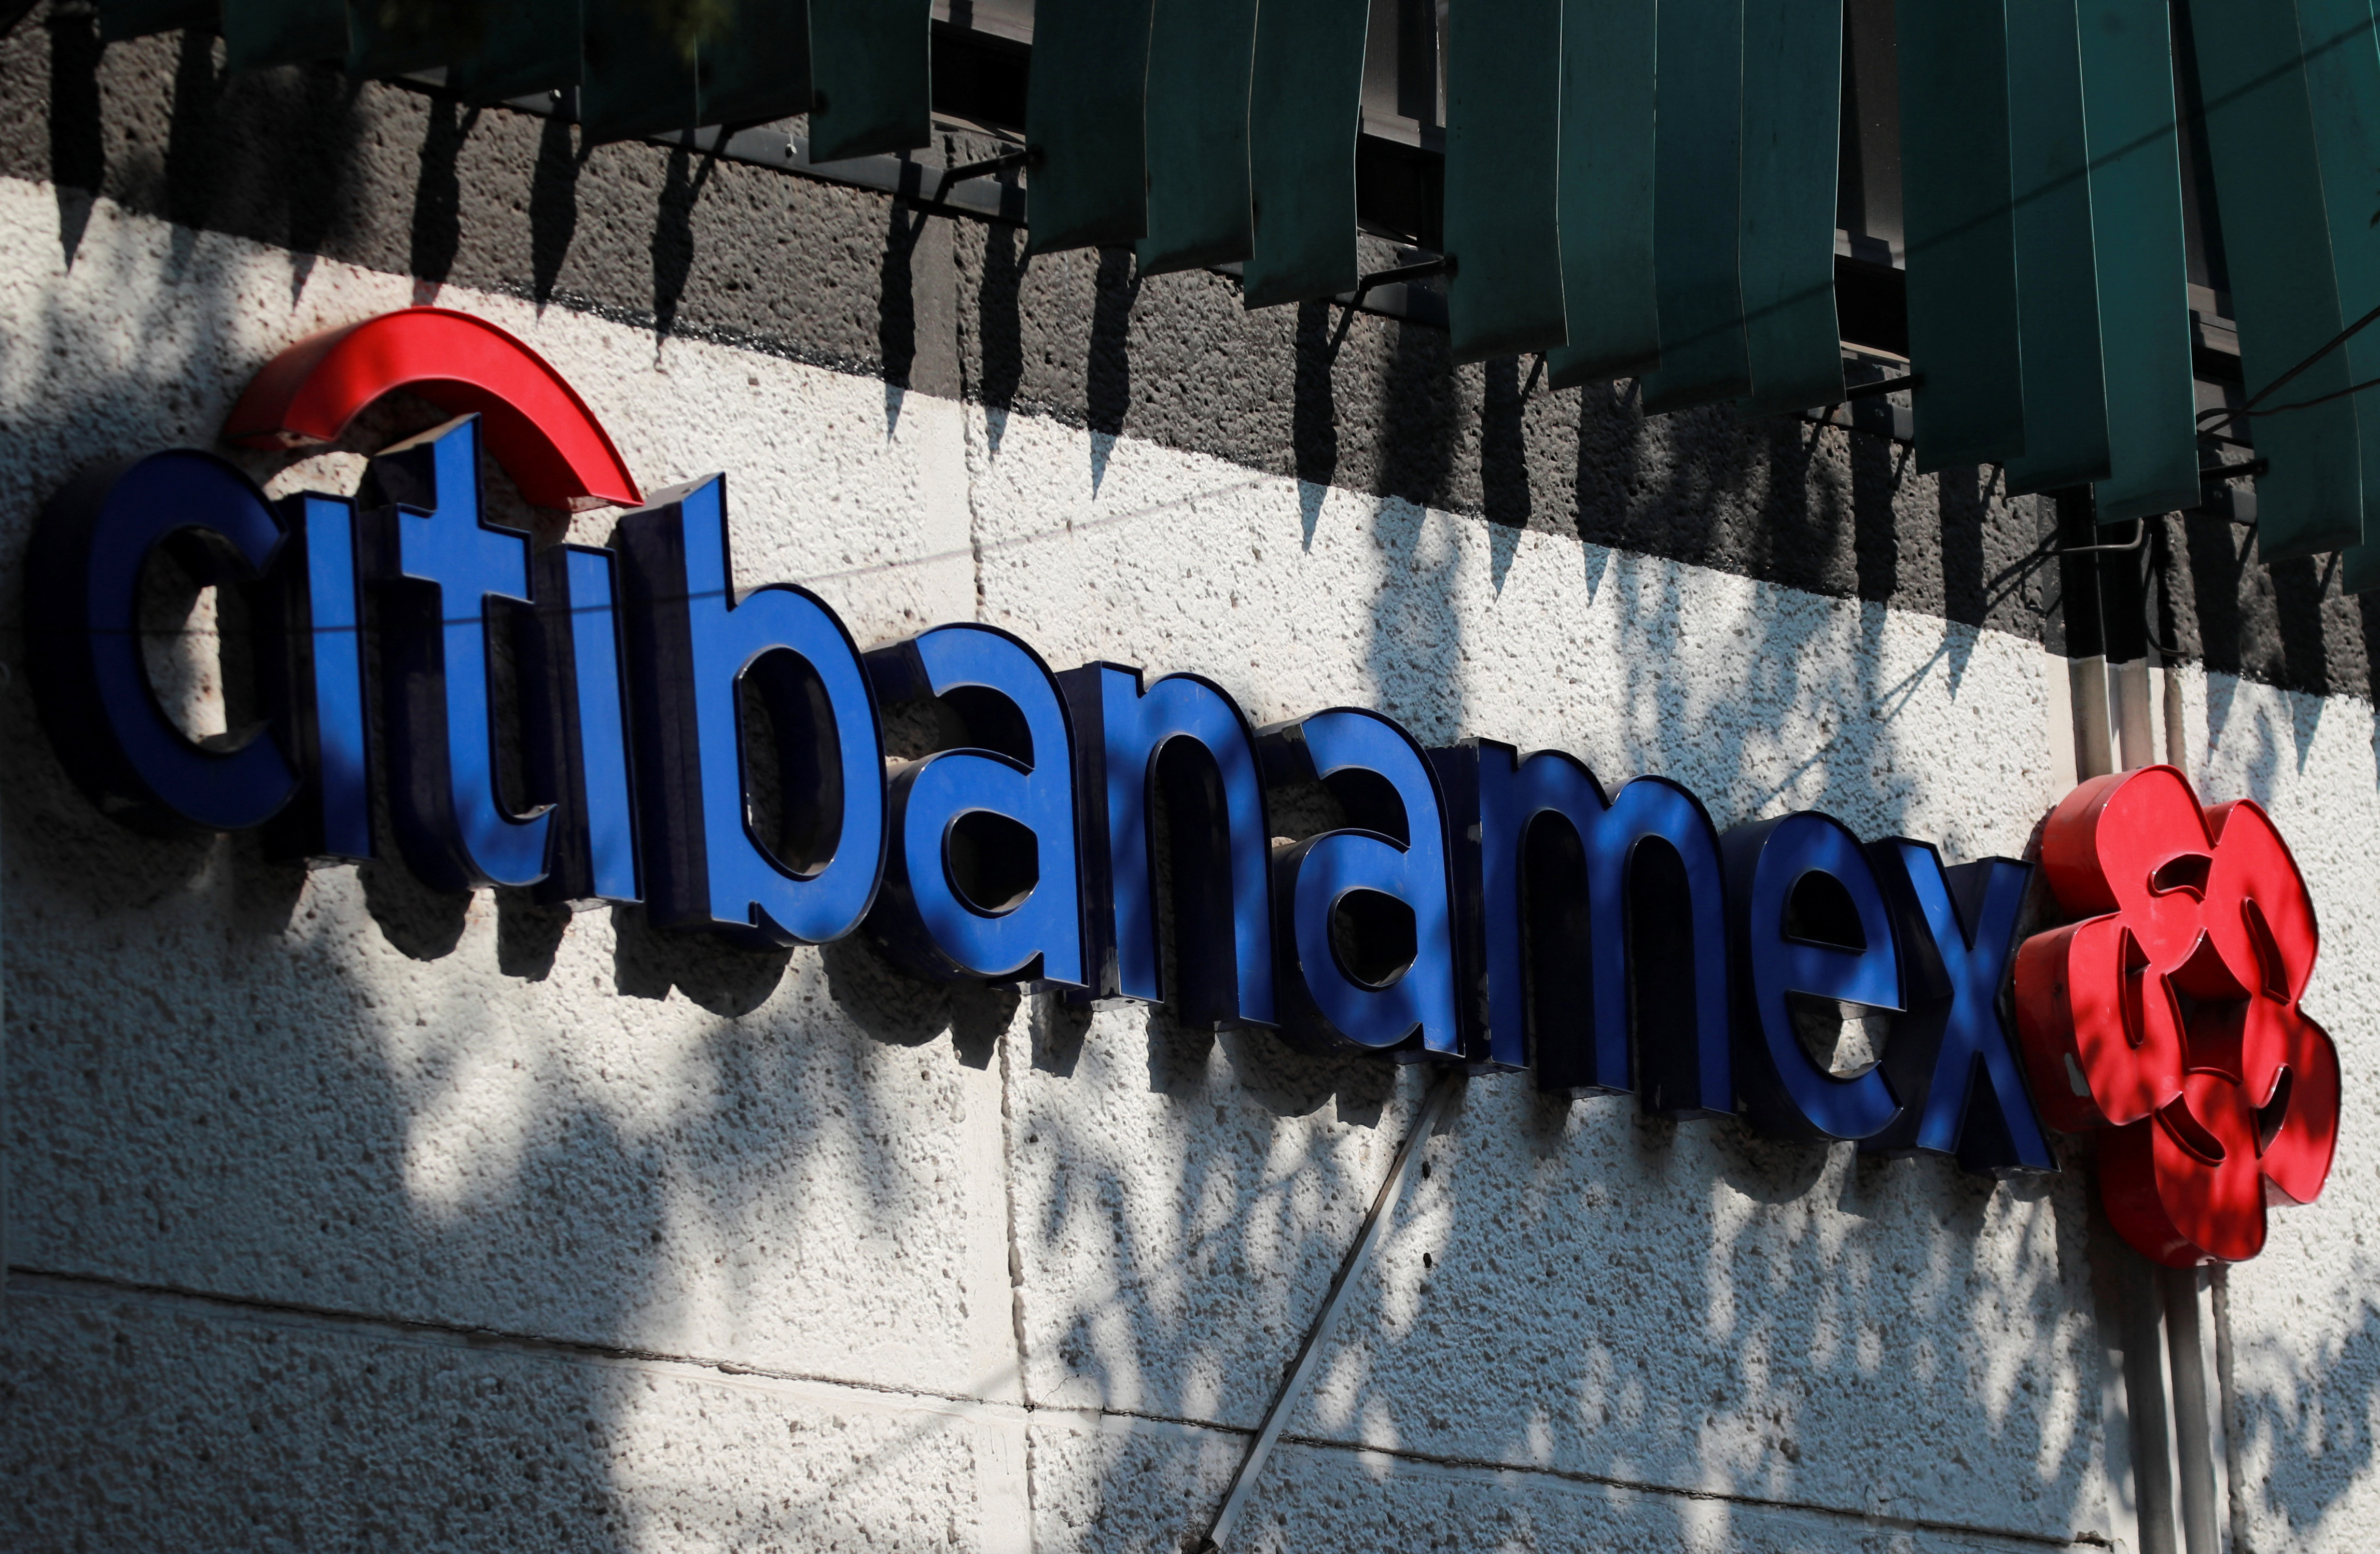 The logo of Citibanamex bank in front of a branch is pictured in Mexico City